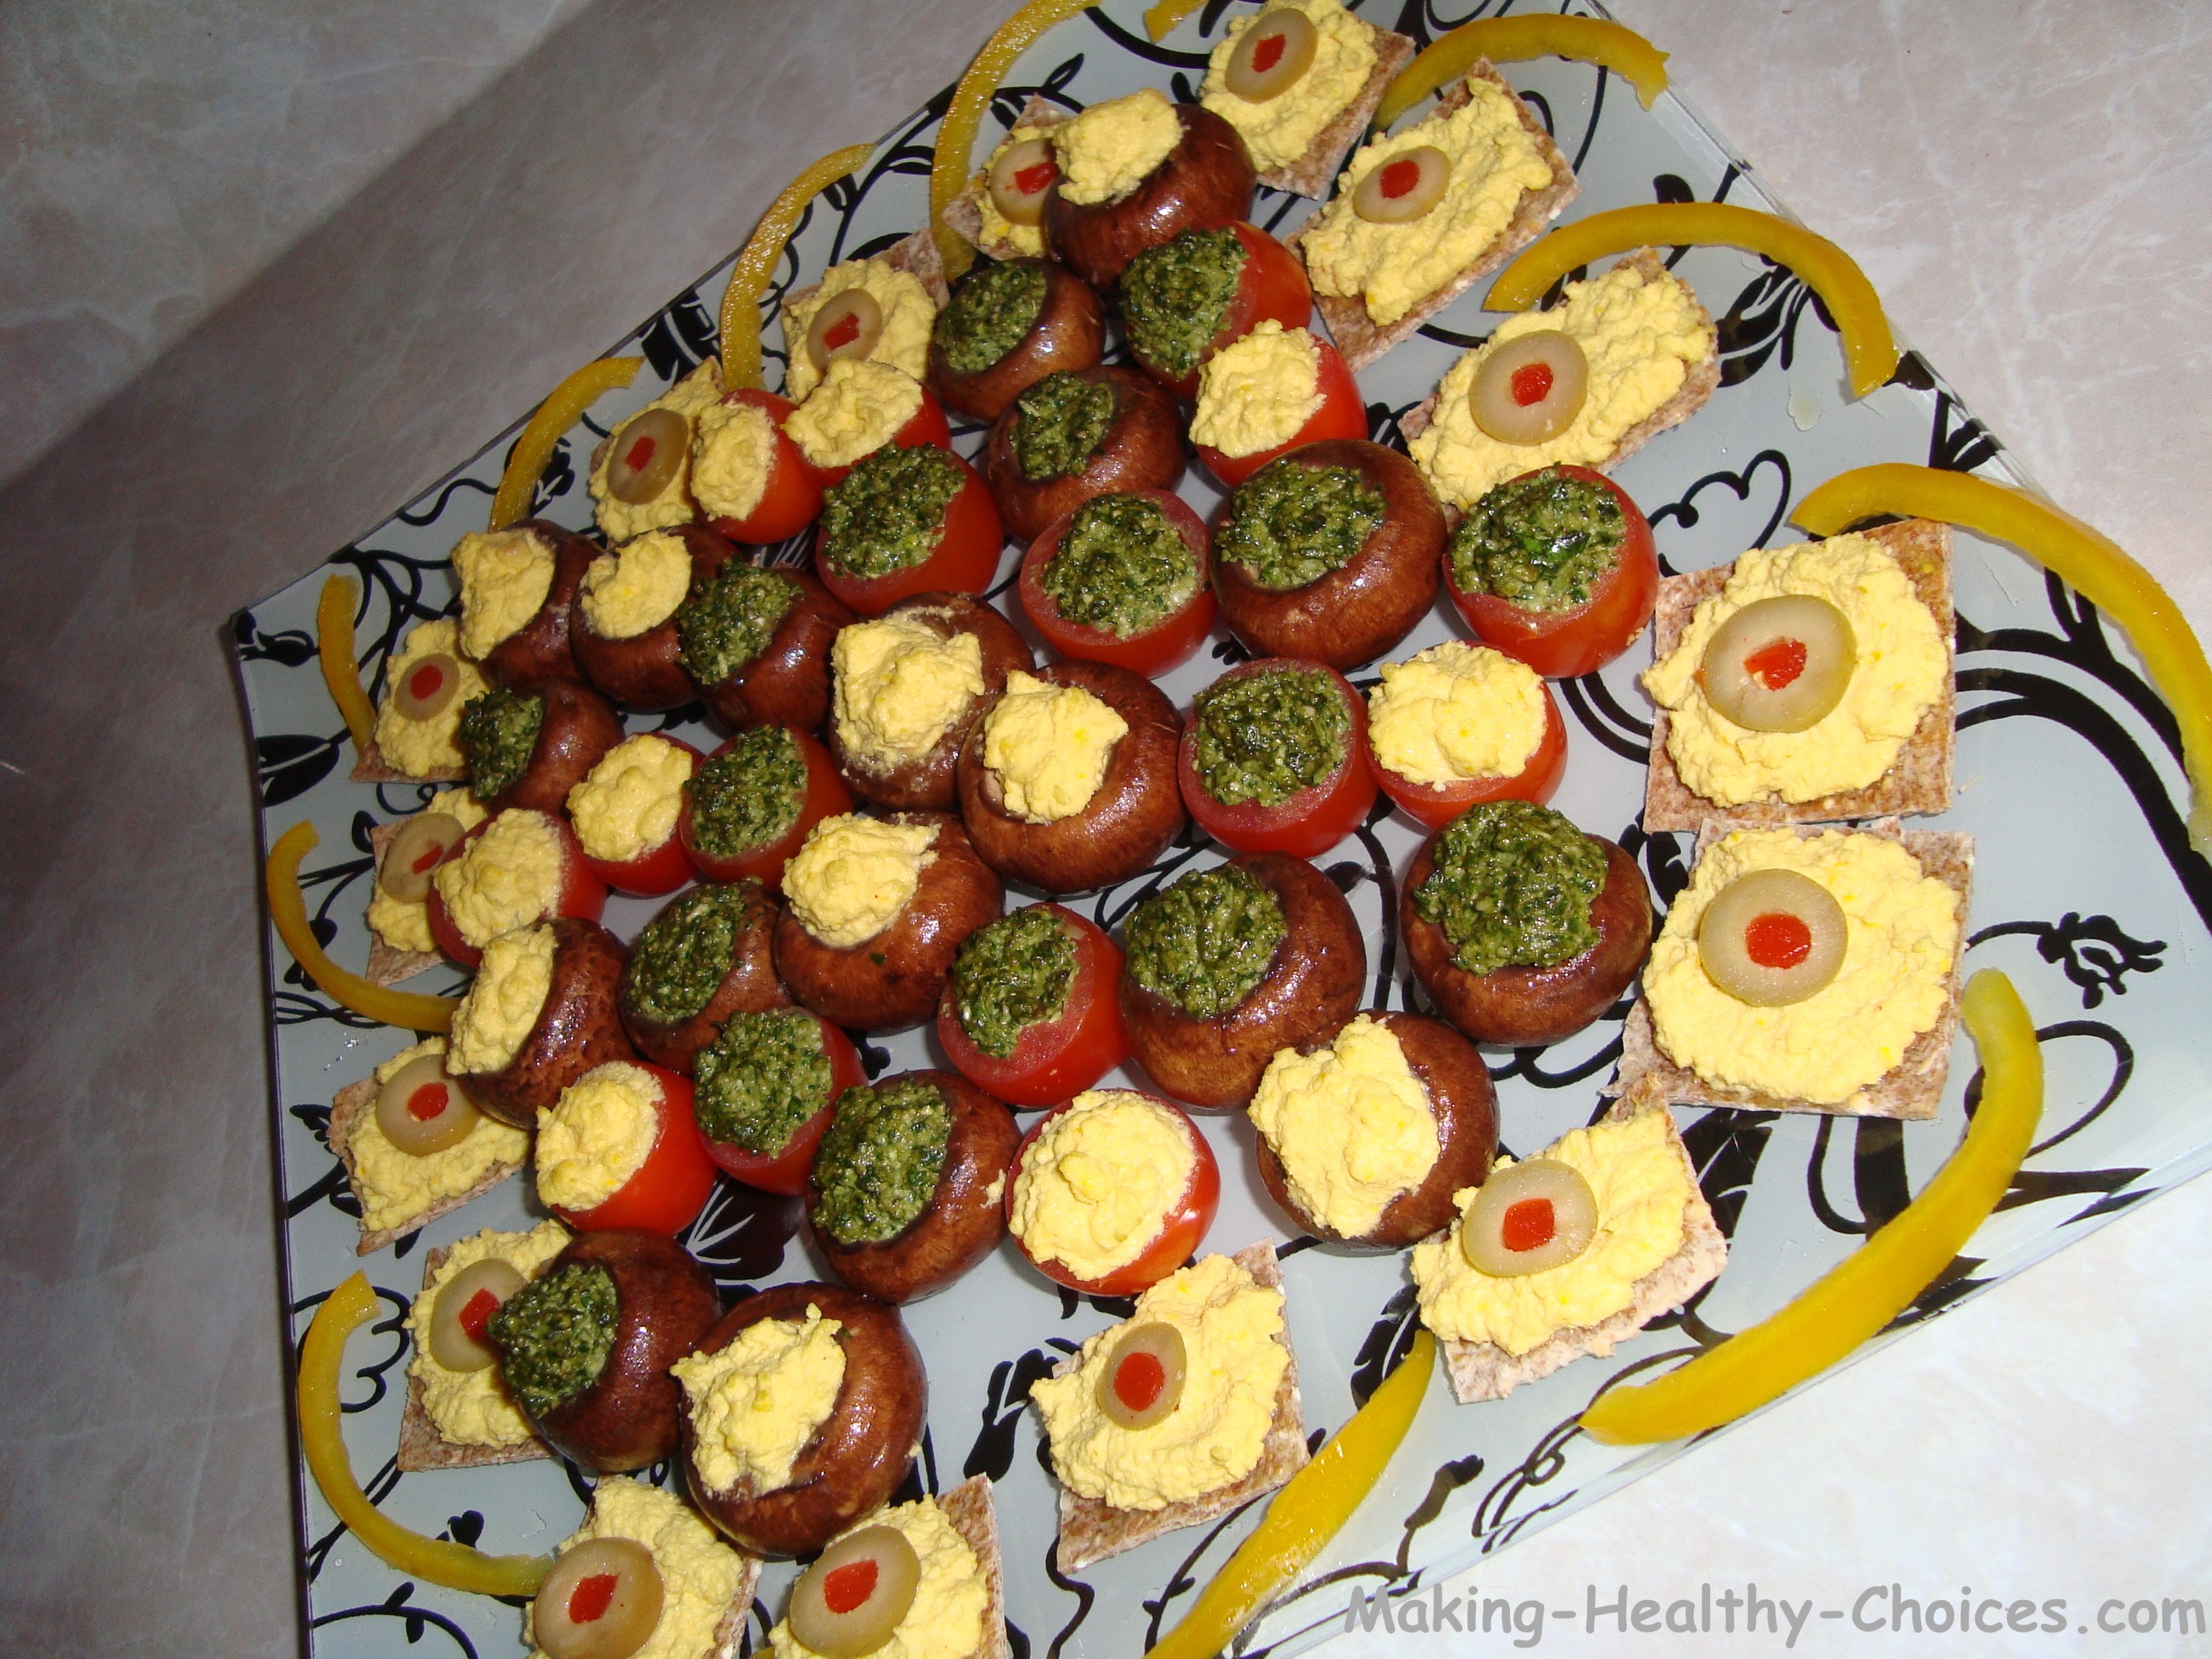 Stuffed mushrooms with raw vegan pesto or raw vegan cheese sauce; a healthy appetizer that is raw and vegan.